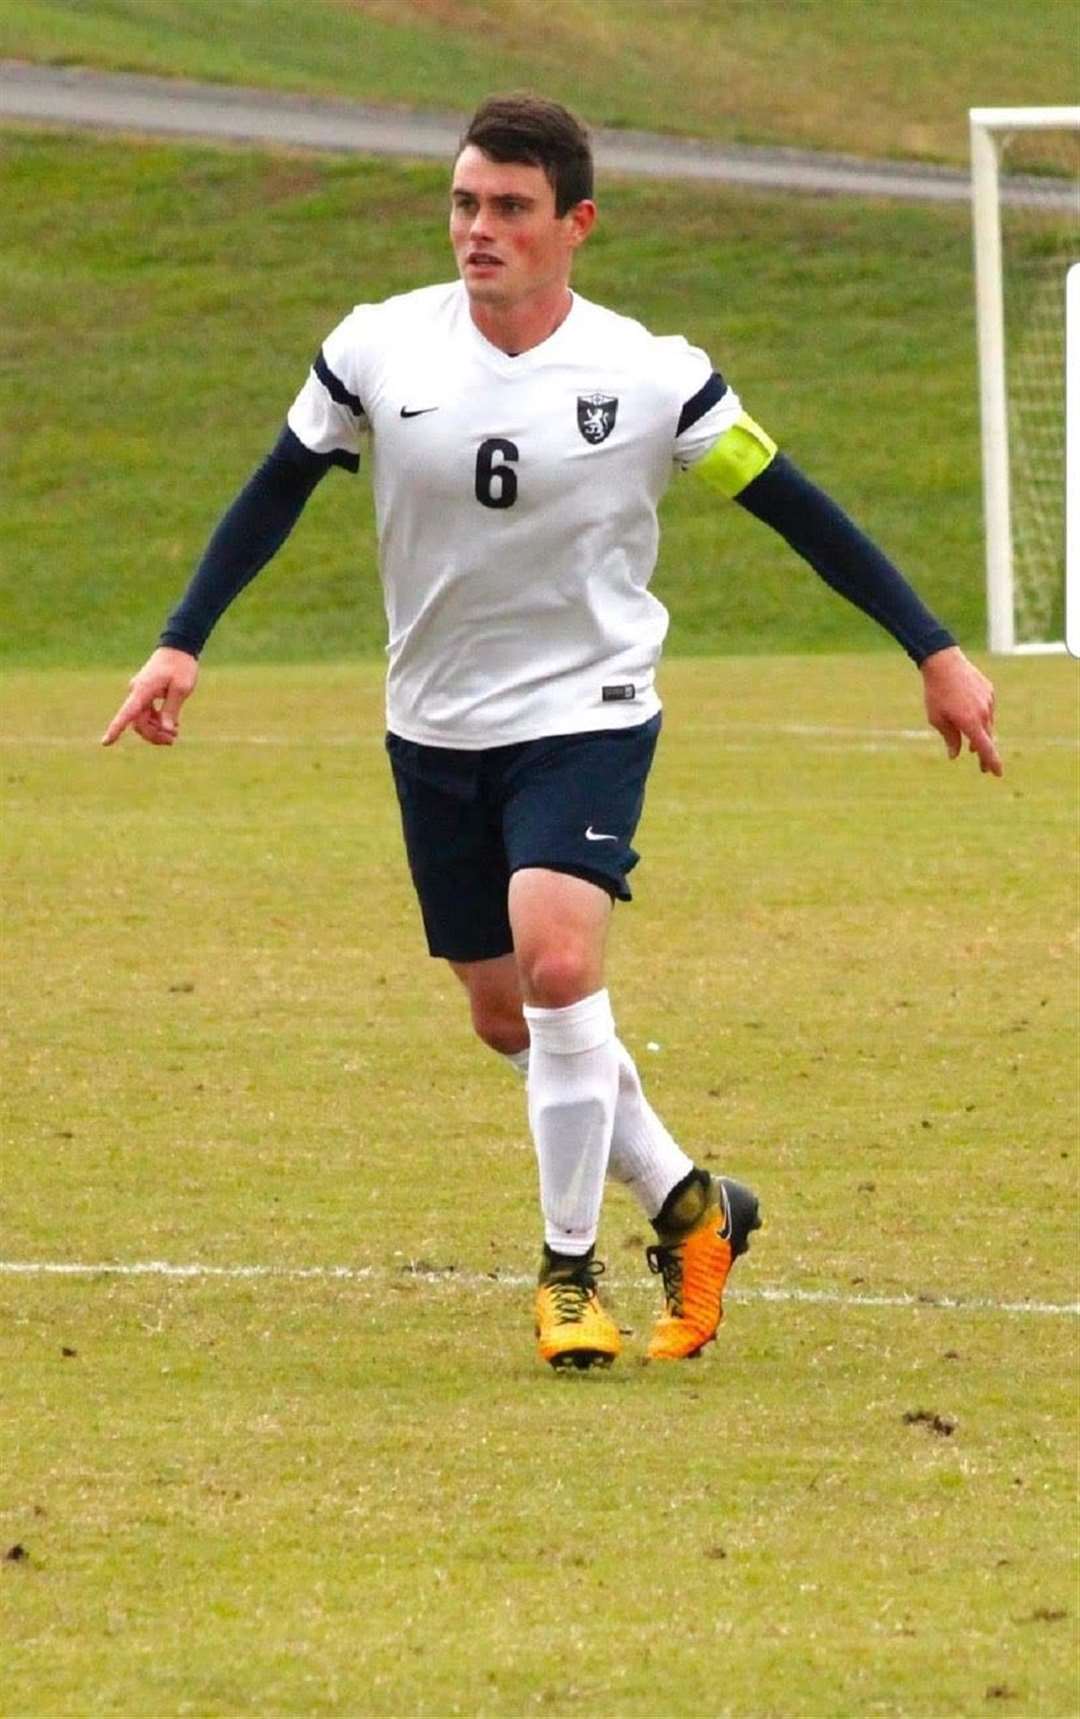 Ben Allan in action for King University in Tennessee.